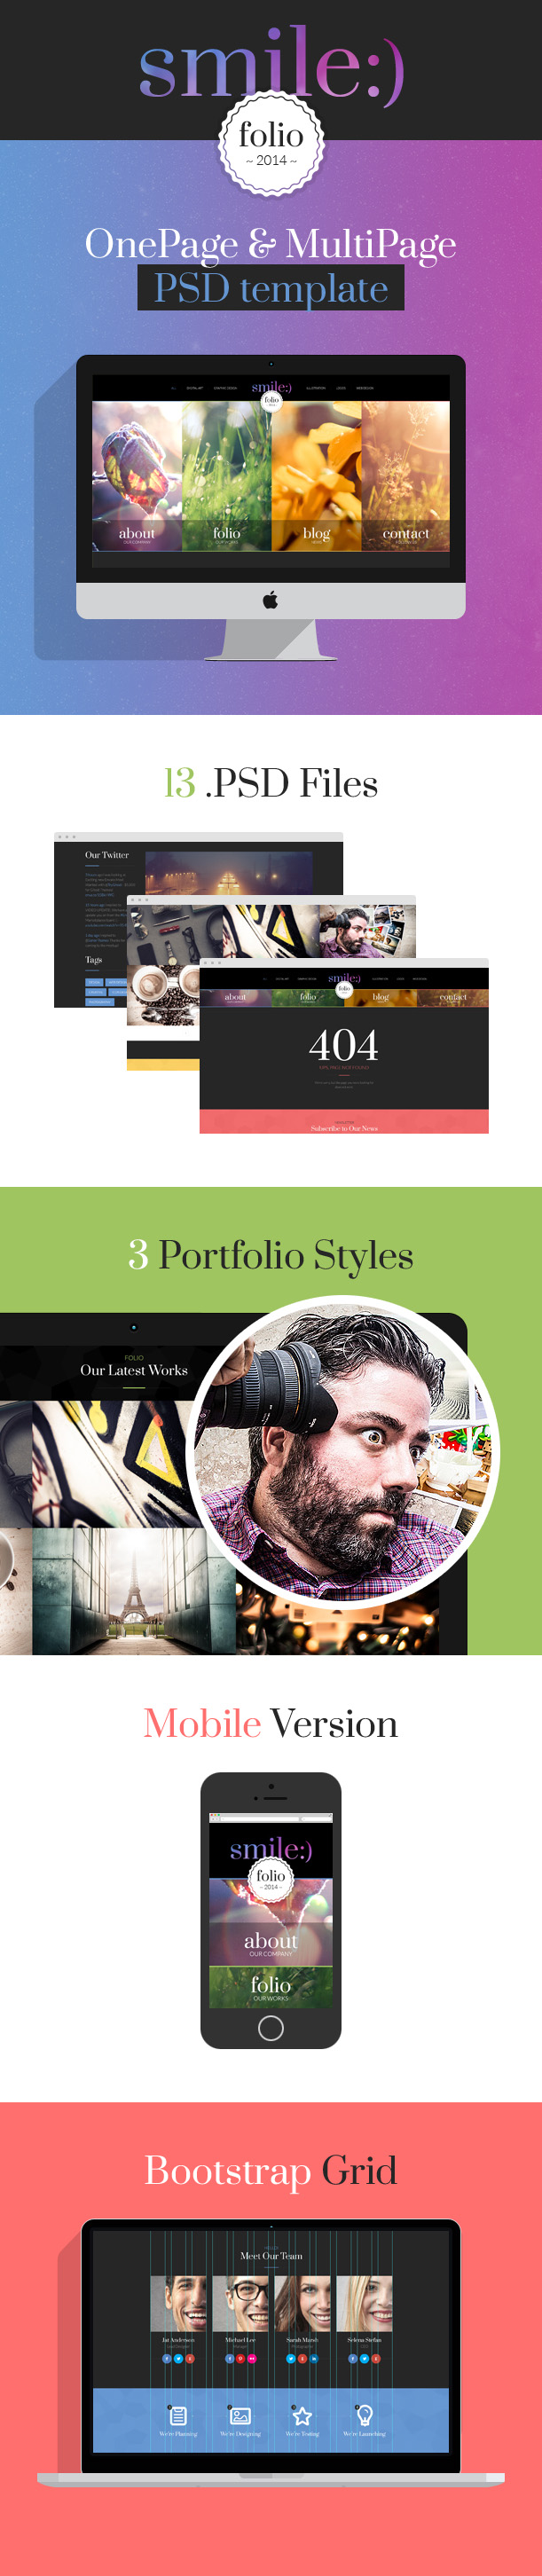 smile PSD bootstrap template